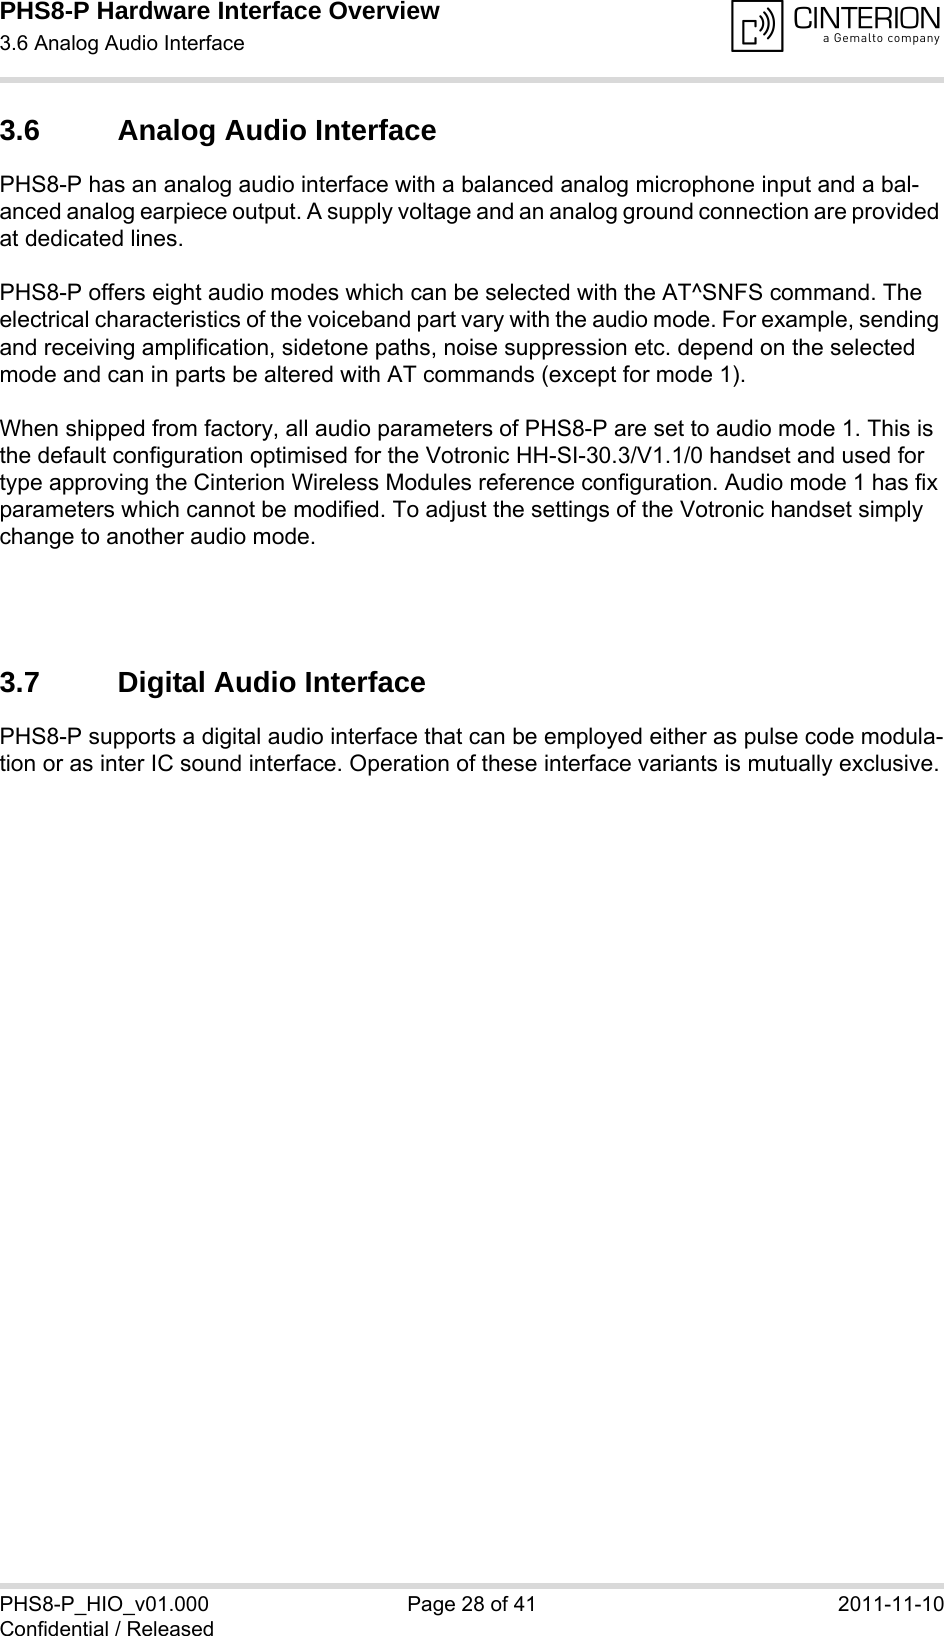 PHS8-P Hardware Interface Overview3.6 Analog Audio Interface29PHS8-P_HIO_v01.000 Page 28 of 41 2011-11-10Confidential / Released3.6 Analog Audio InterfacePHS8-P has an analog audio interface with a balanced analog microphone input and a bal-anced analog earpiece output. A supply voltage and an analog ground connection are provided at dedicated lines.PHS8-P offers eight audio modes which can be selected with the AT^SNFS command. The electrical characteristics of the voiceband part vary with the audio mode. For example, sending and receiving amplification, sidetone paths, noise suppression etc. depend on the selected mode and can in parts be altered with AT commands (except for mode 1).When shipped from factory, all audio parameters of PHS8-P are set to audio mode 1. This is the default configuration optimised for the Votronic HH-SI-30.3/V1.1/0 handset and used for type approving the Cinterion Wireless Modules reference configuration. Audio mode 1 has fix parameters which cannot be modified. To adjust the settings of the Votronic handset simply change to another audio mode.3.7 Digital Audio InterfacePHS8-P supports a digital audio interface that can be employed either as pulse code modula-tion or as inter IC sound interface. Operation of these interface variants is mutually exclusive.